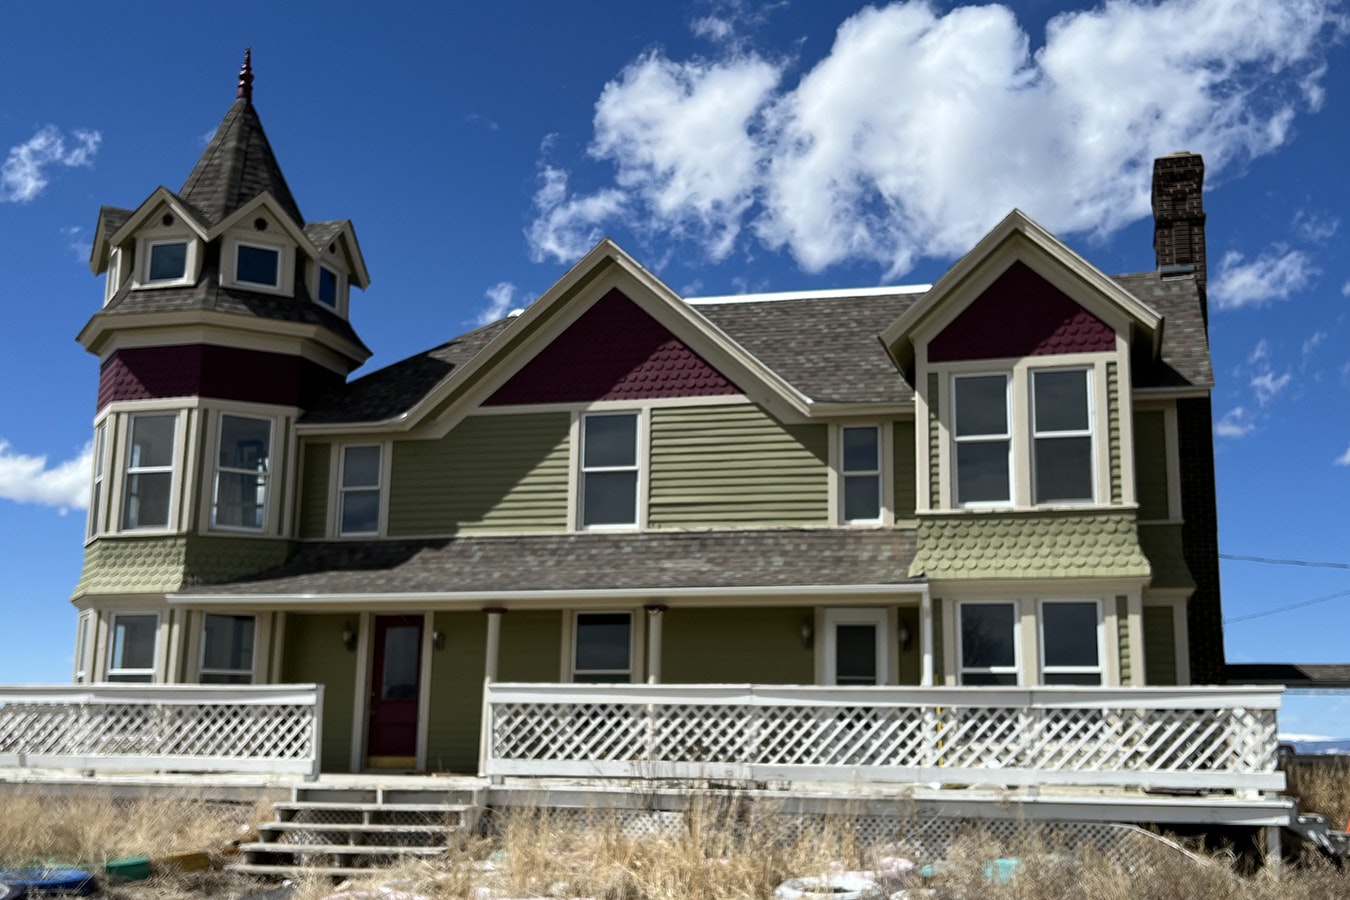 The Holliday House mansion, just west of Laramie, is for sale for $525,000.